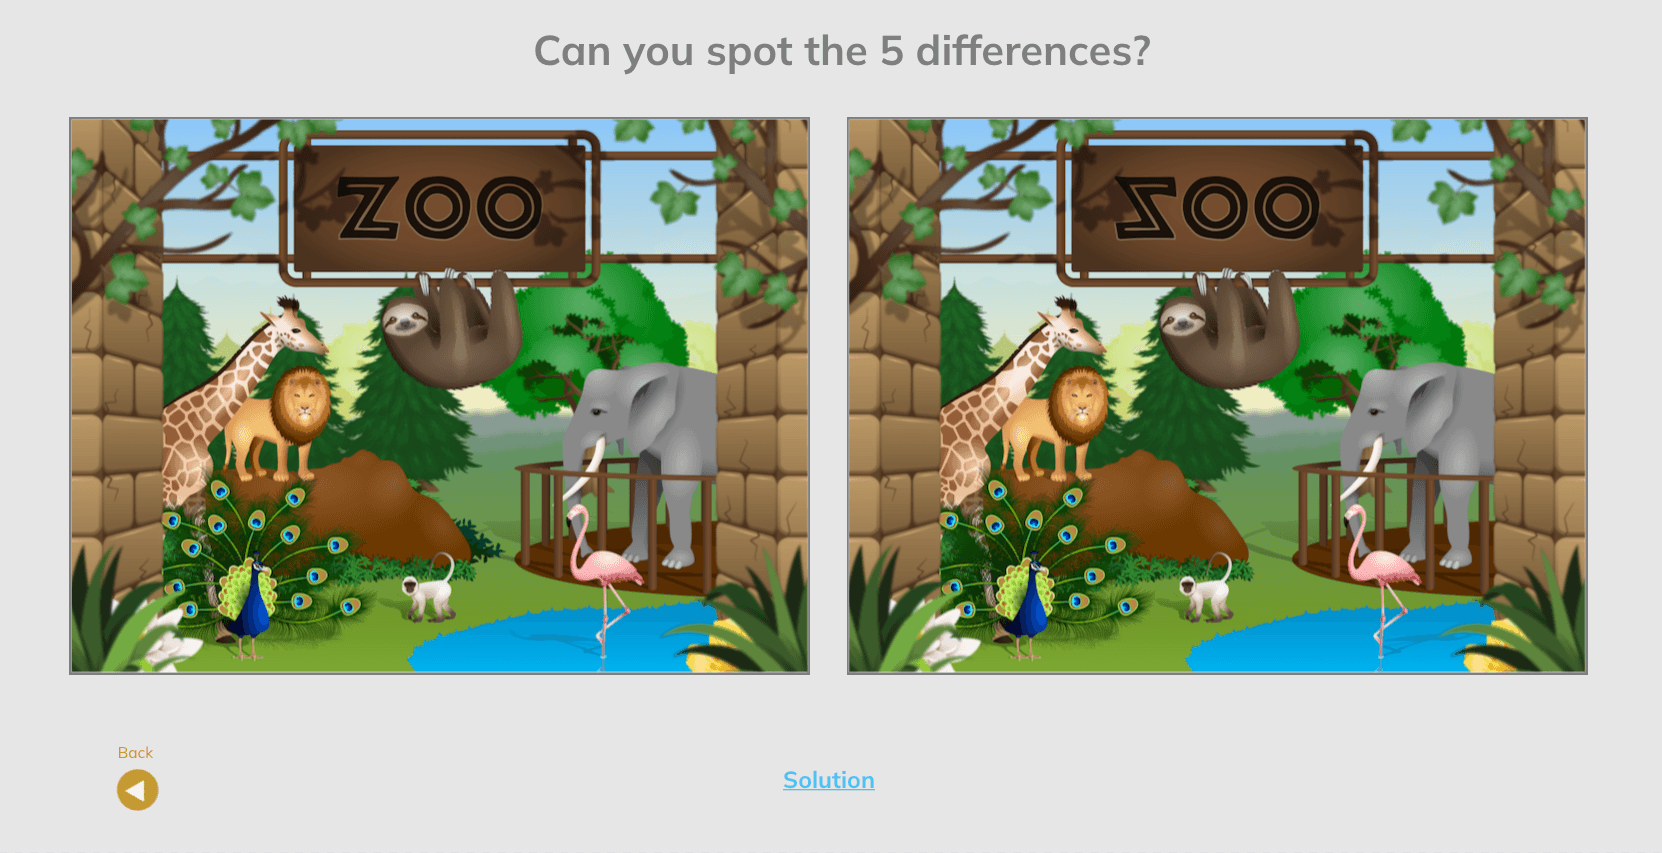 Playing a spot-the-difference game with kindergarten students, with a zoo theme.